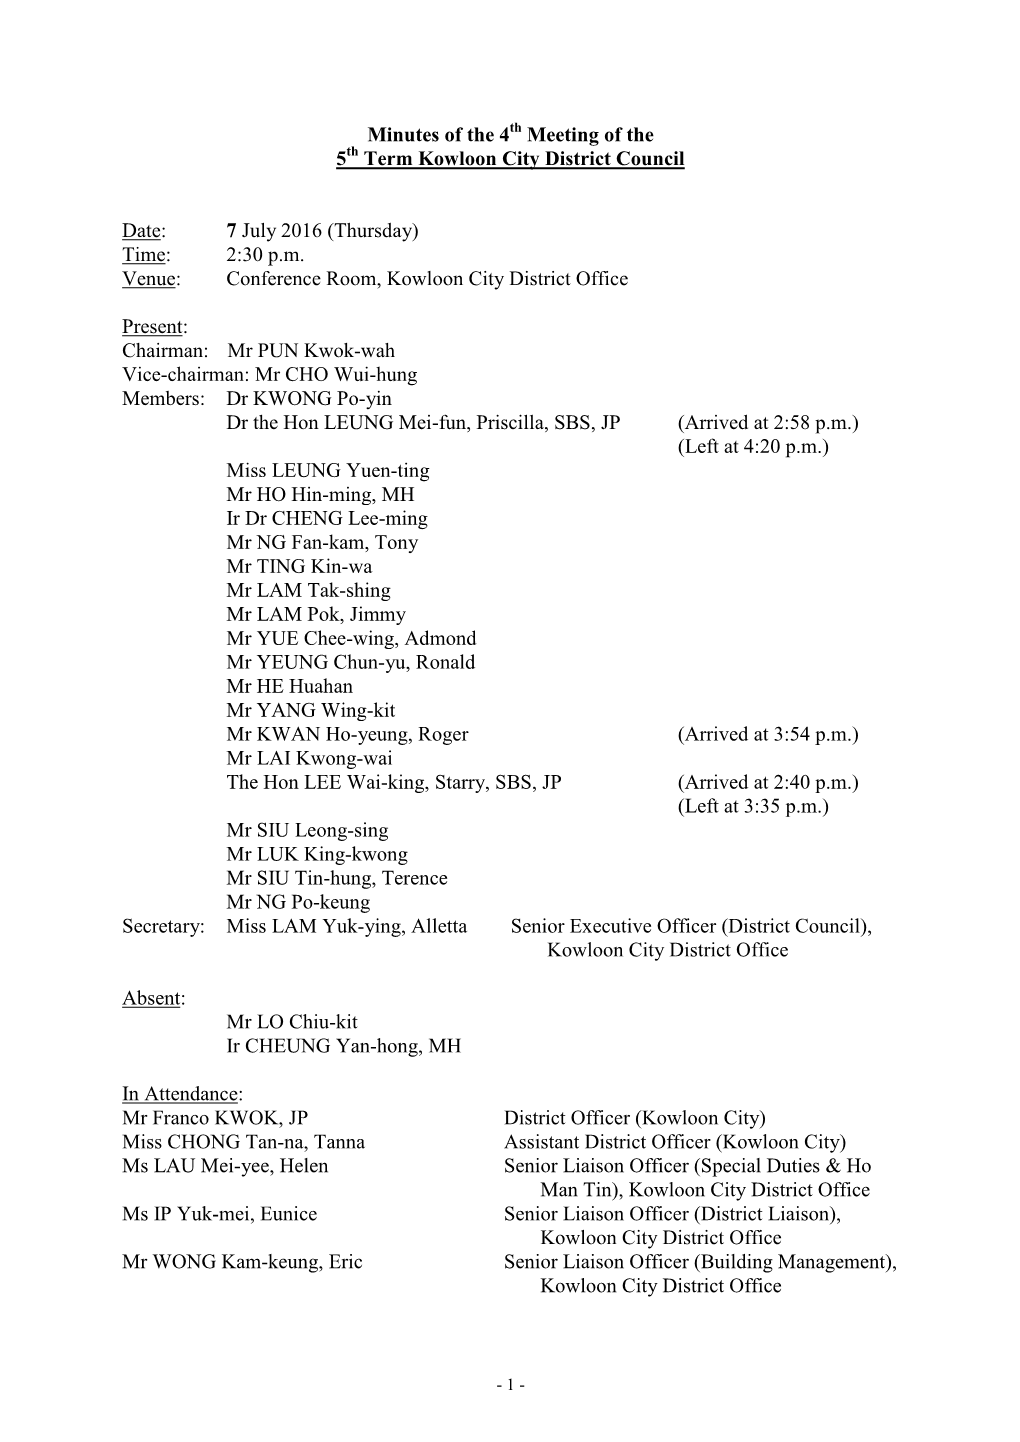 Minutes of the 4 Meeting of the 5 Term Kowloon City District Council Date